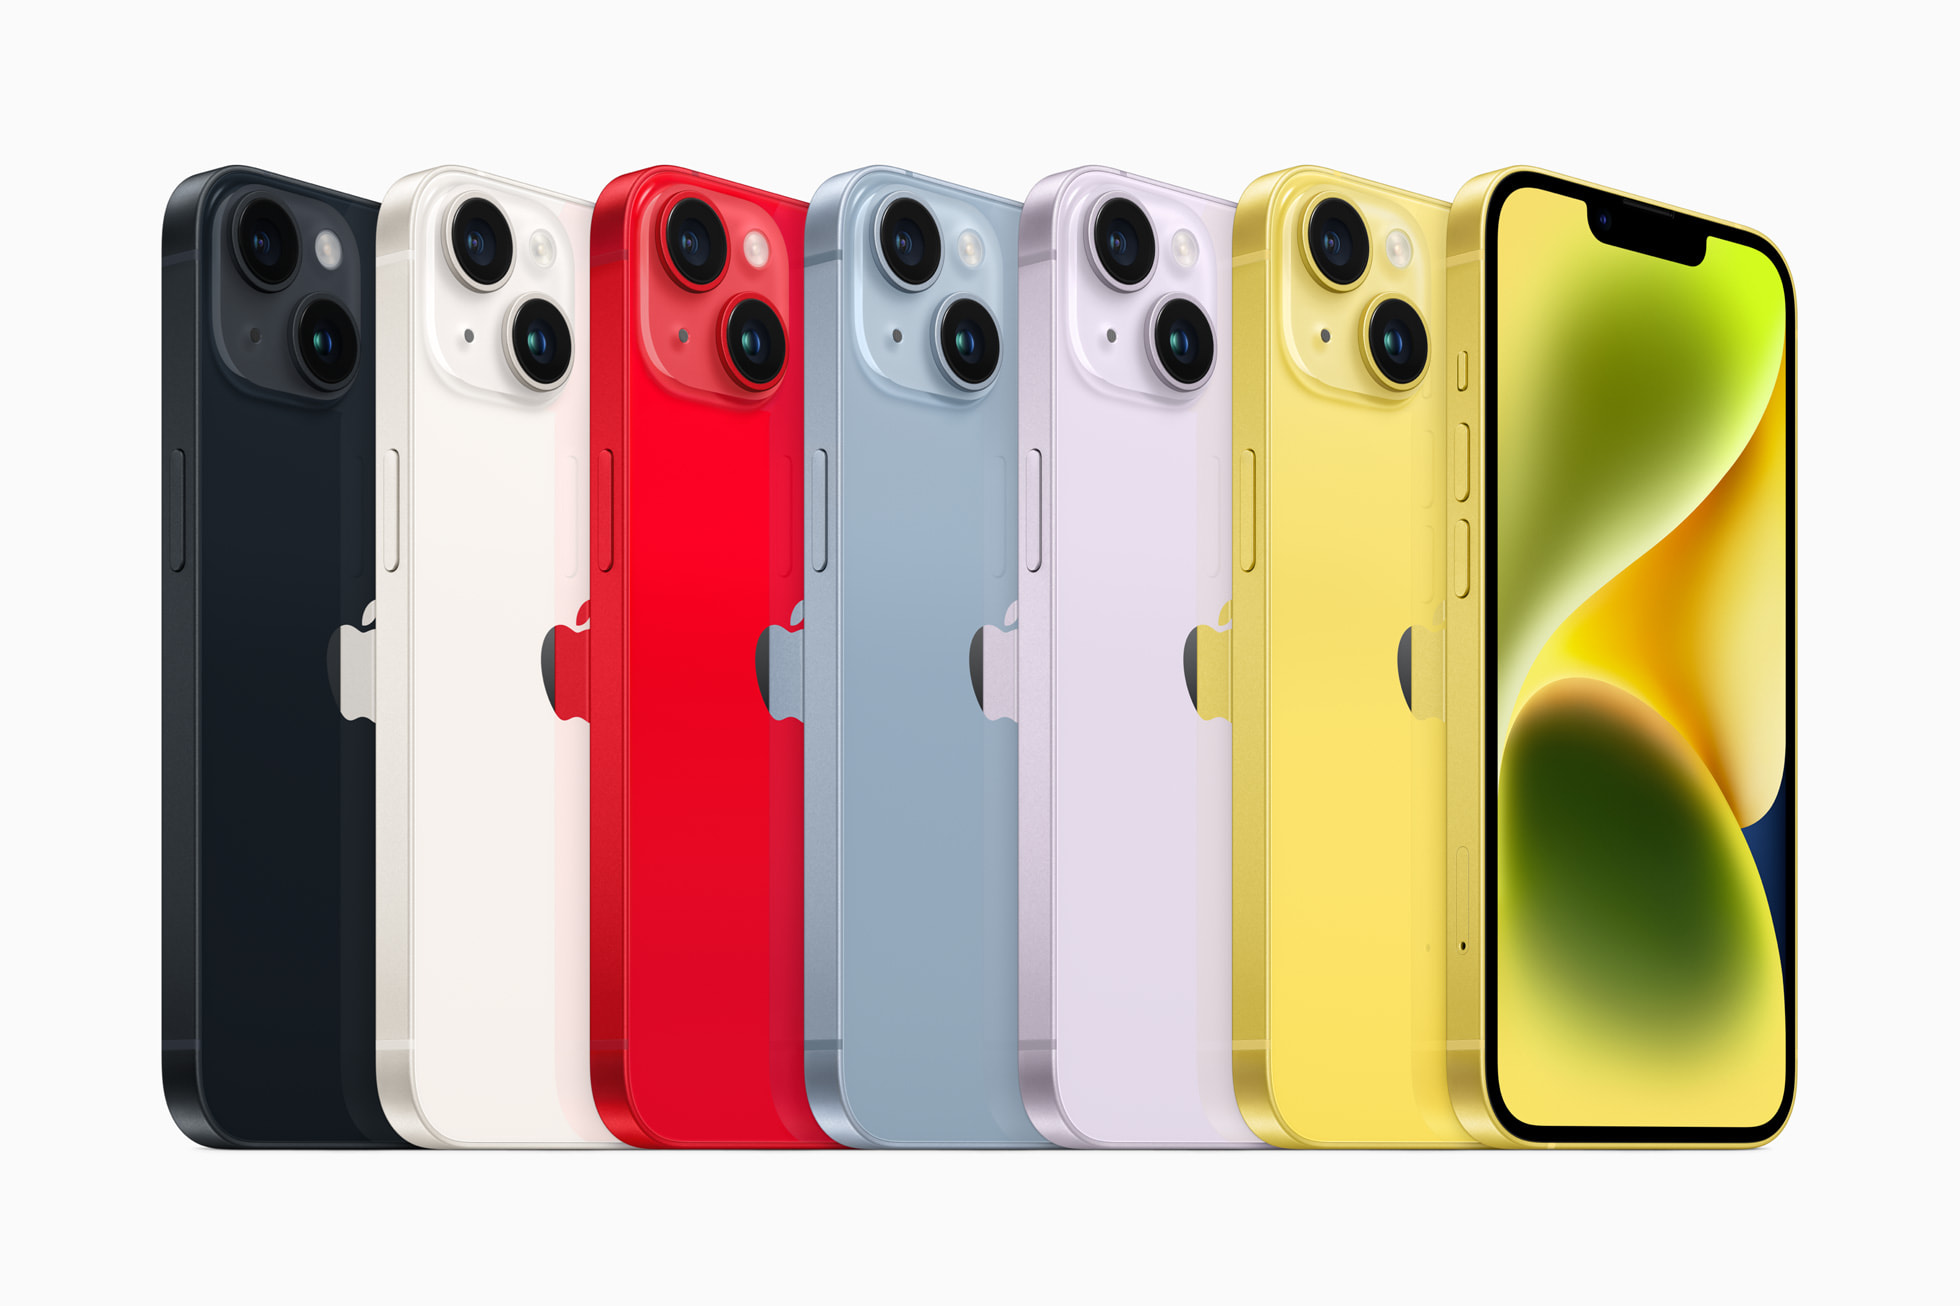 All colors available in the iPhone 14 range are presented